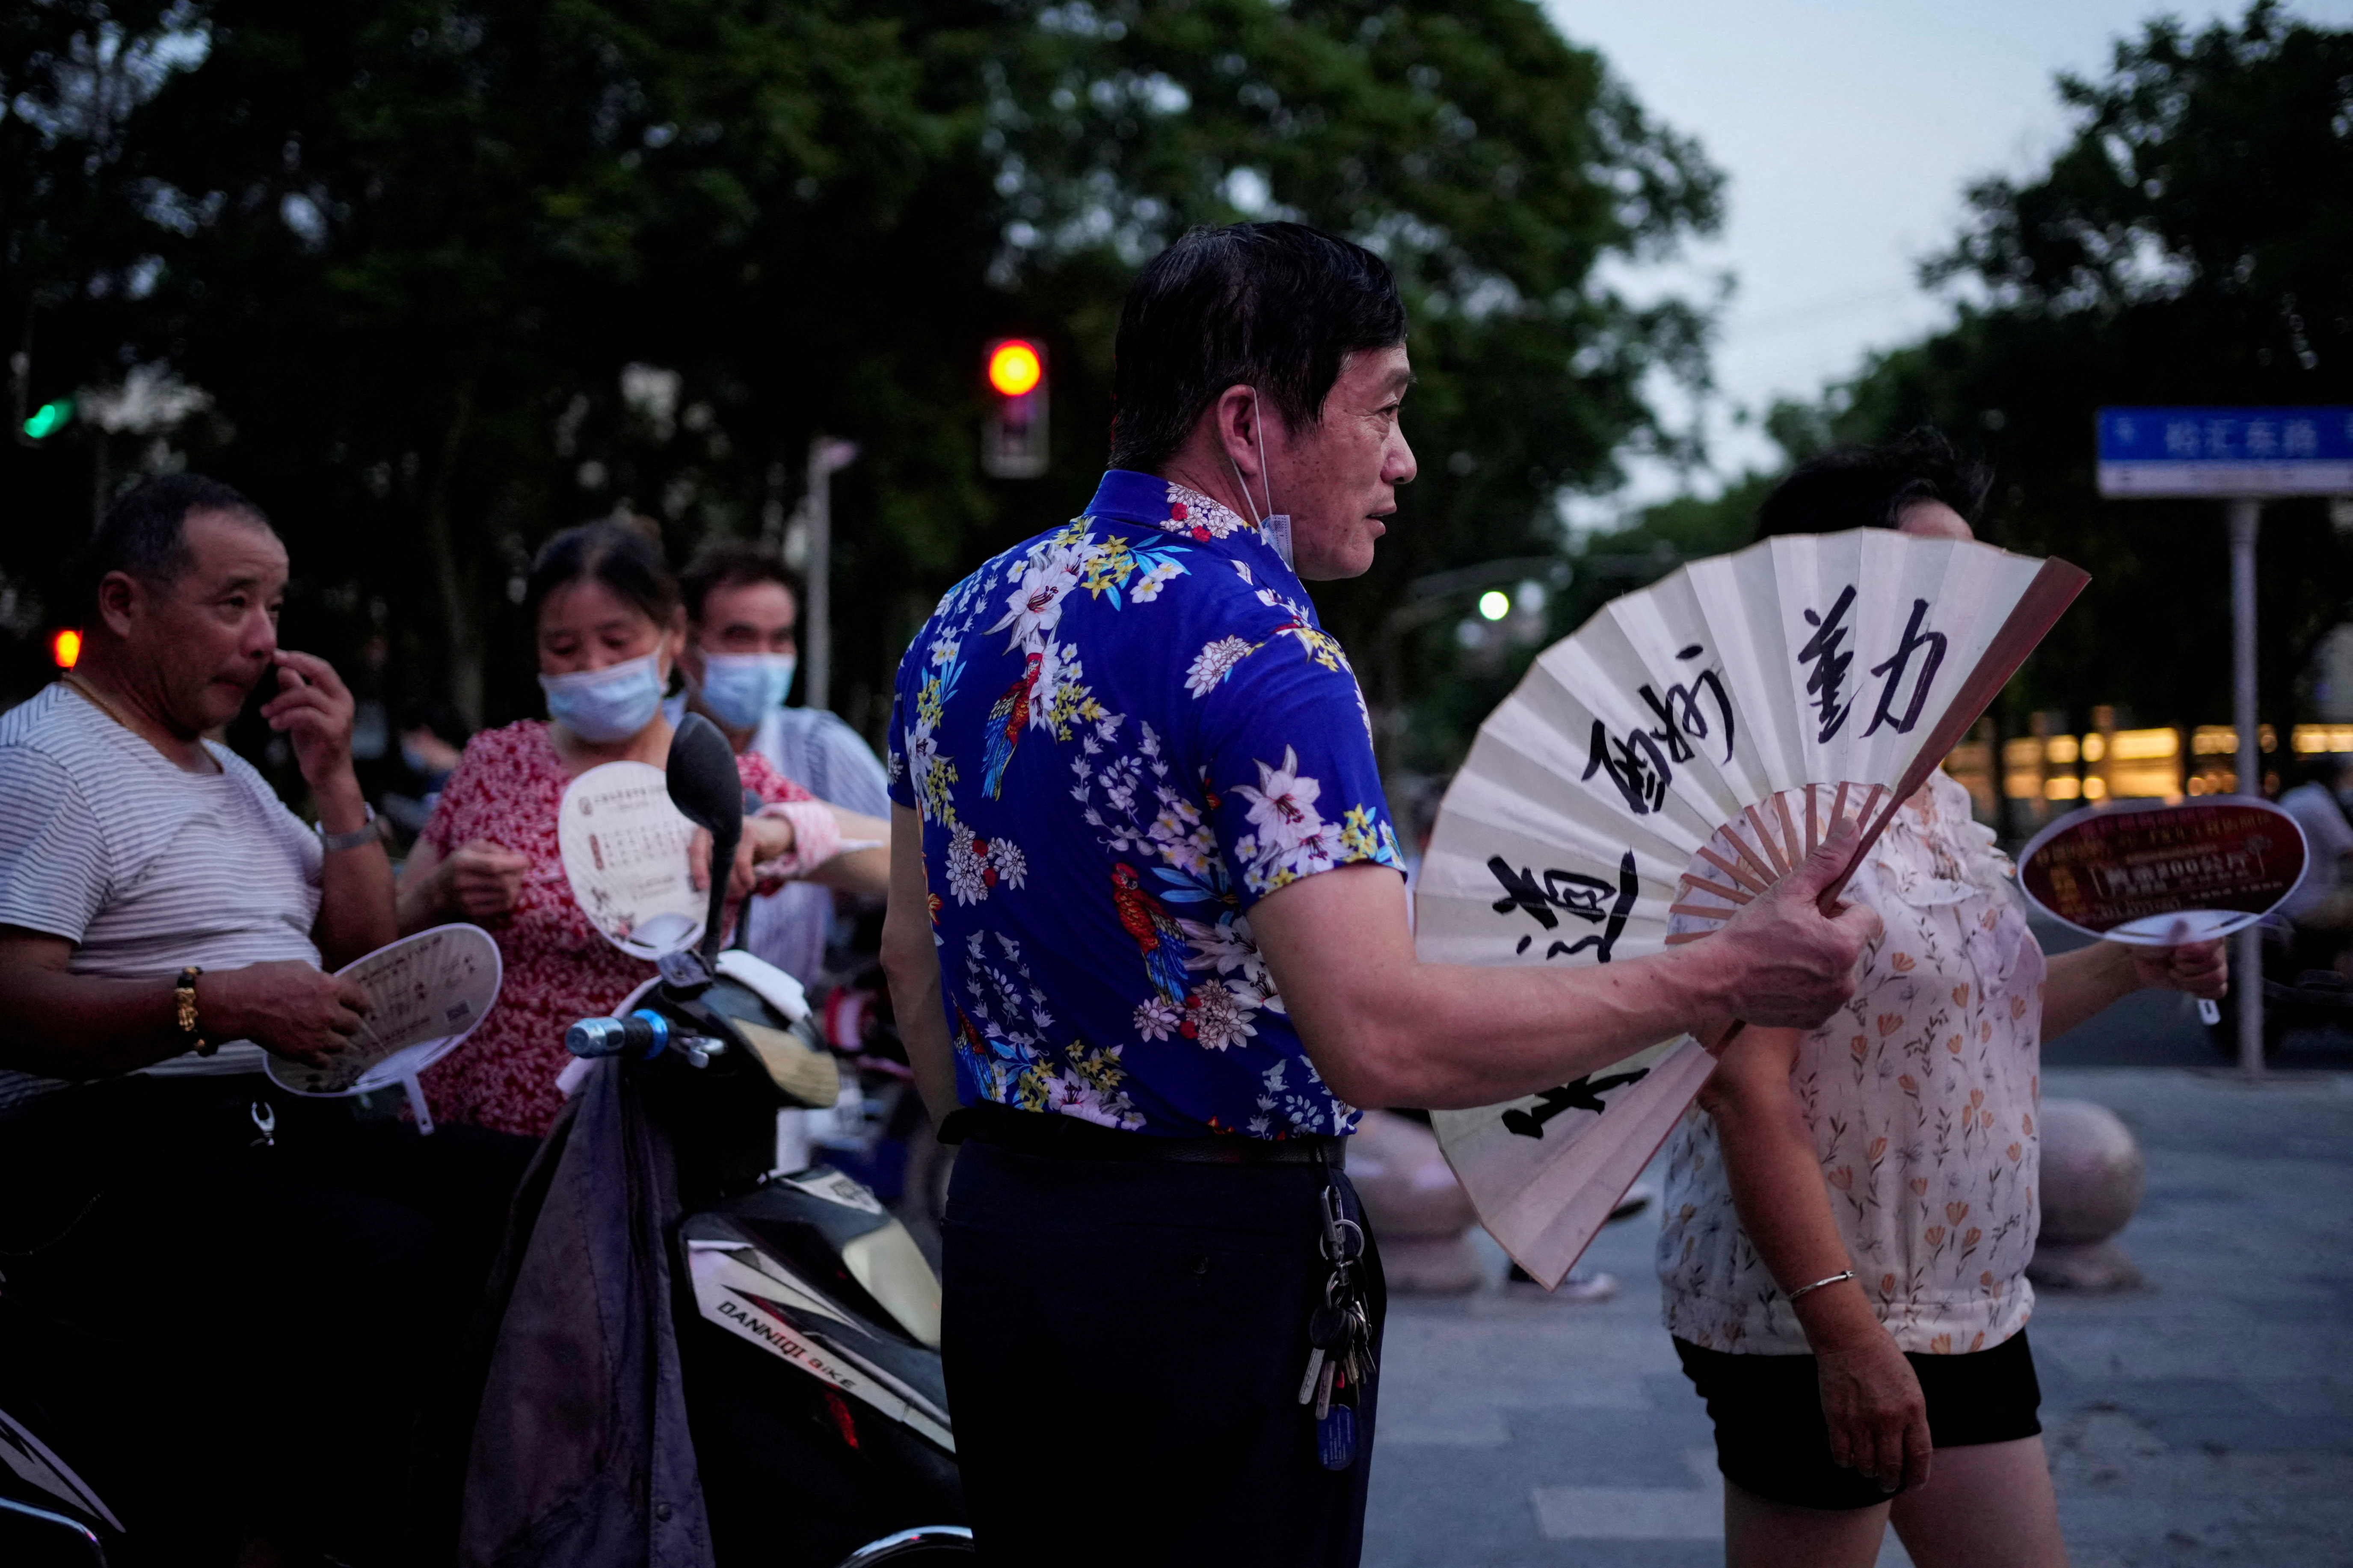 People use fans as they gather in a park amid a heatwave warning in Shanghai, China